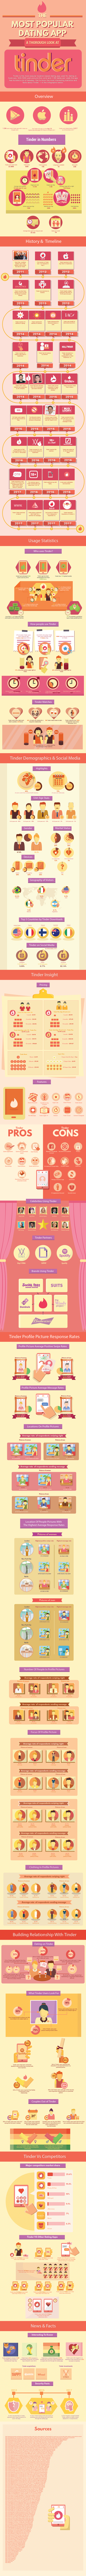 Infographic - Facts & Stats About The Most Popular Dating App 